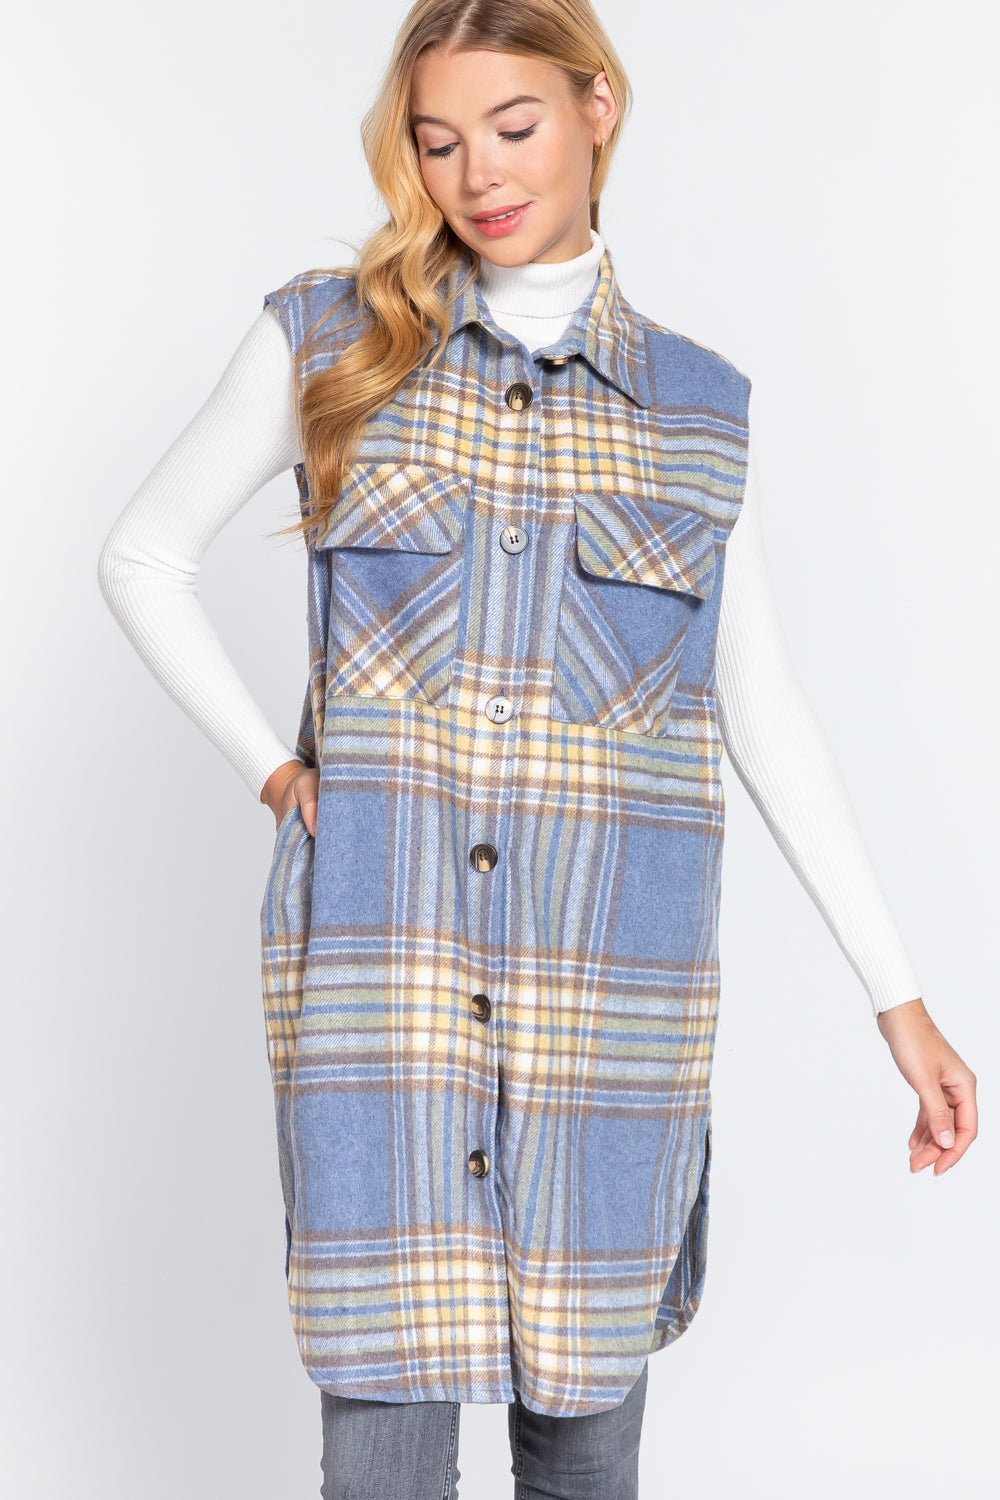 Blue/Mustard Notched Collar Brushed Plaid Vest - 2 styles - women's vest at TFC&H Co.